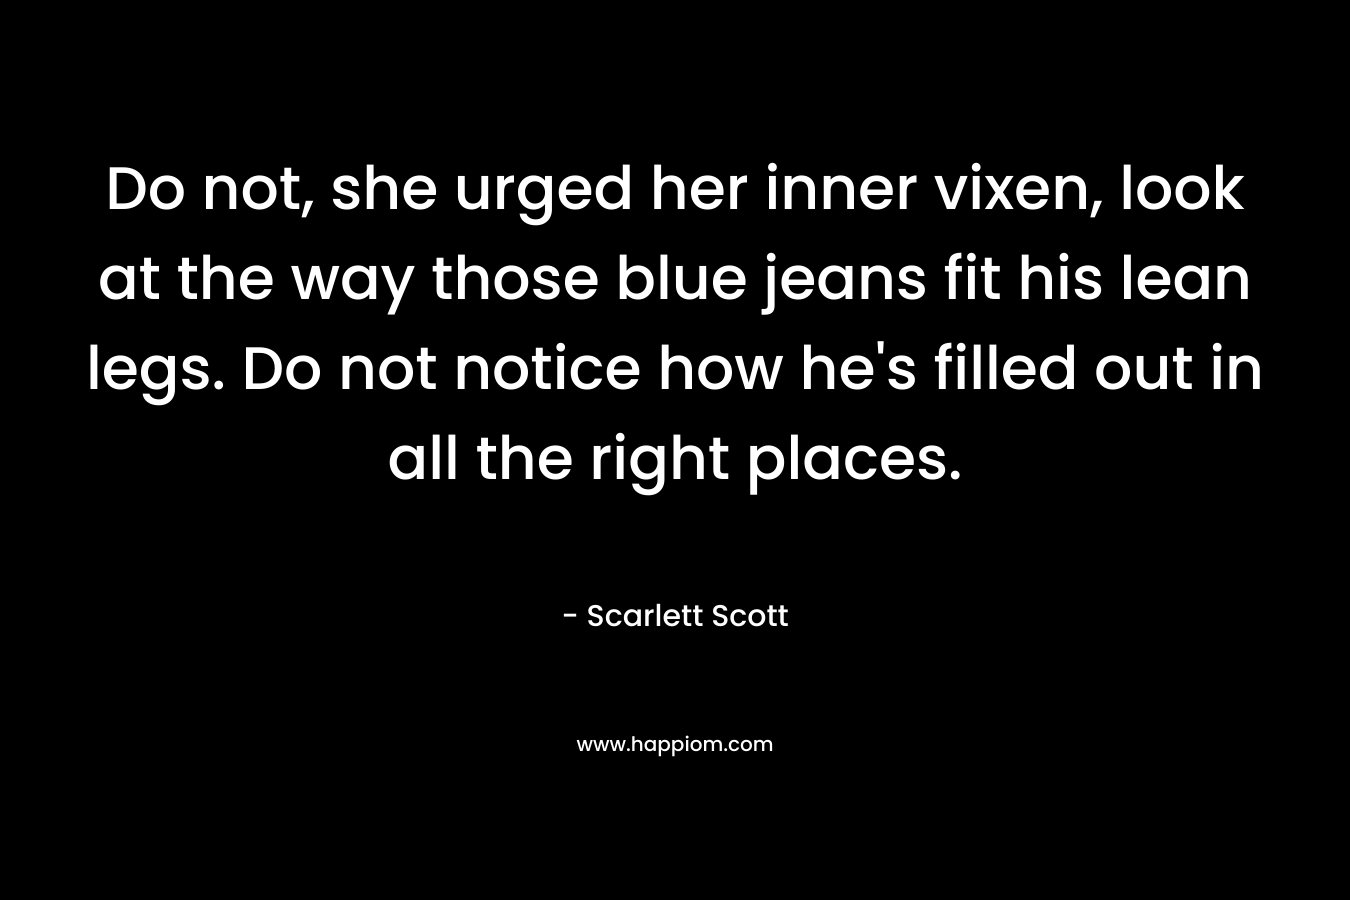 Do not, she urged her inner vixen, look at the way those blue jeans fit his lean legs. Do not notice how he's filled out in all the right places.